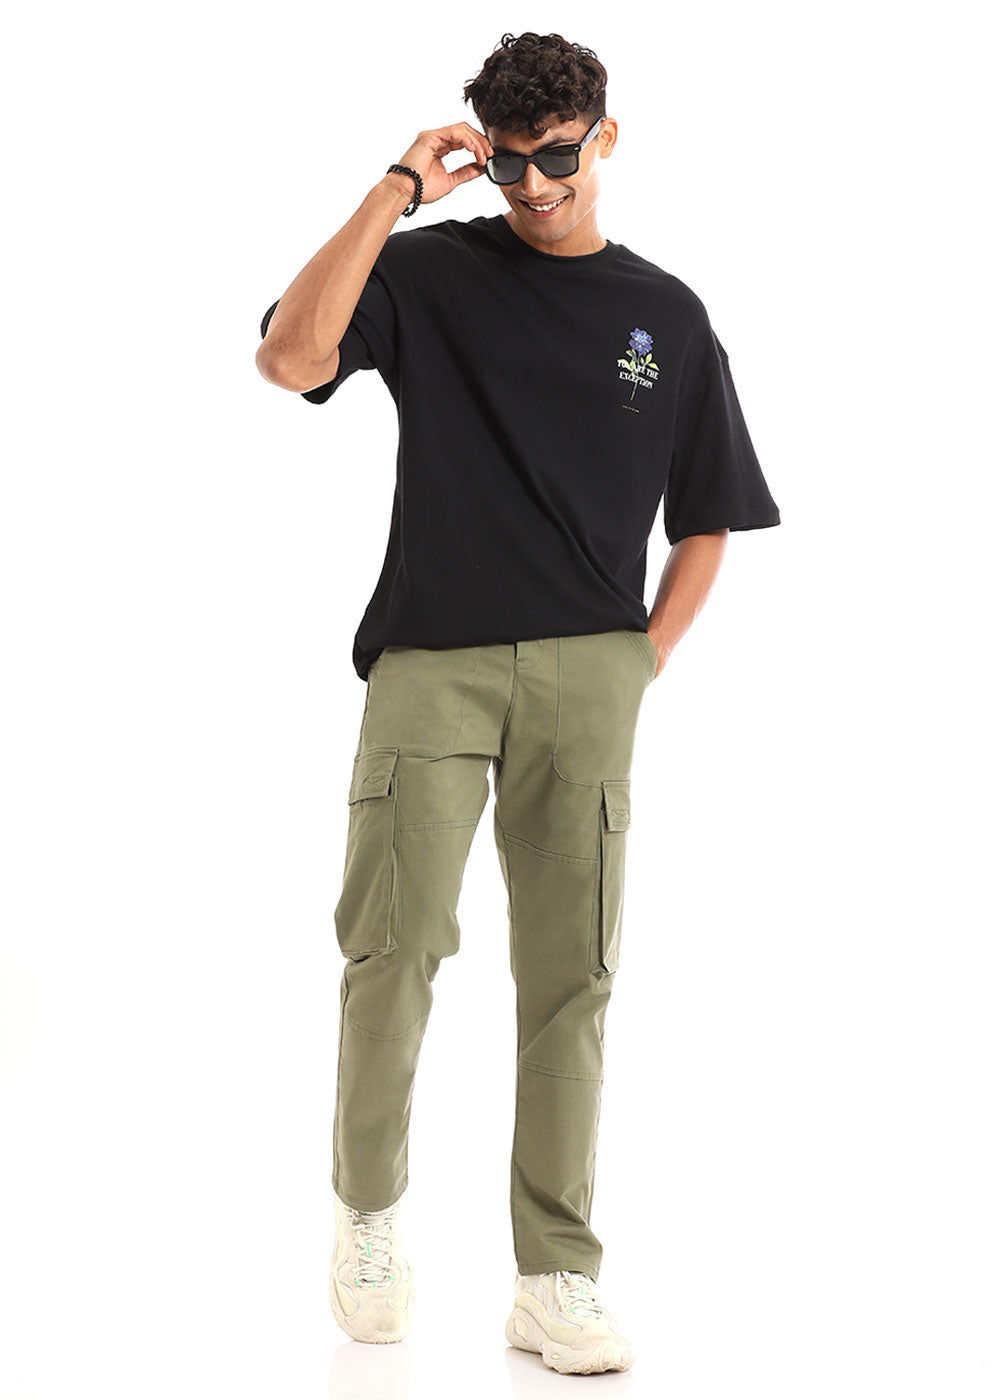 Pale Olive Green Cargo Pant